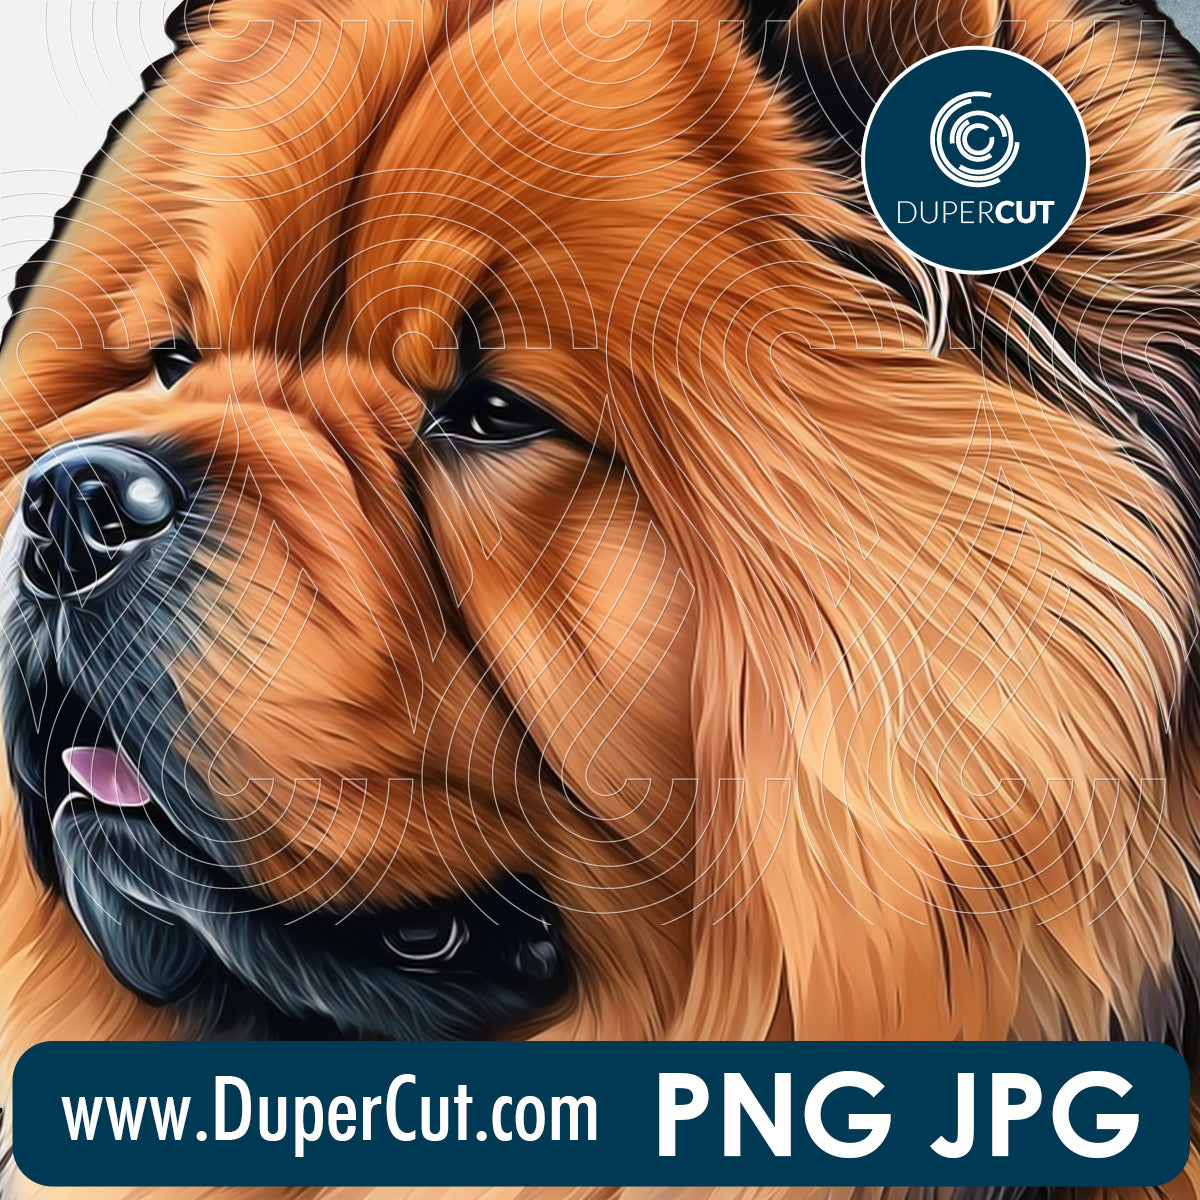 Chow Chow dog breed - JPG PNG file transparent background, high res pattern for sublimation, print on demand by www.dupercut.com